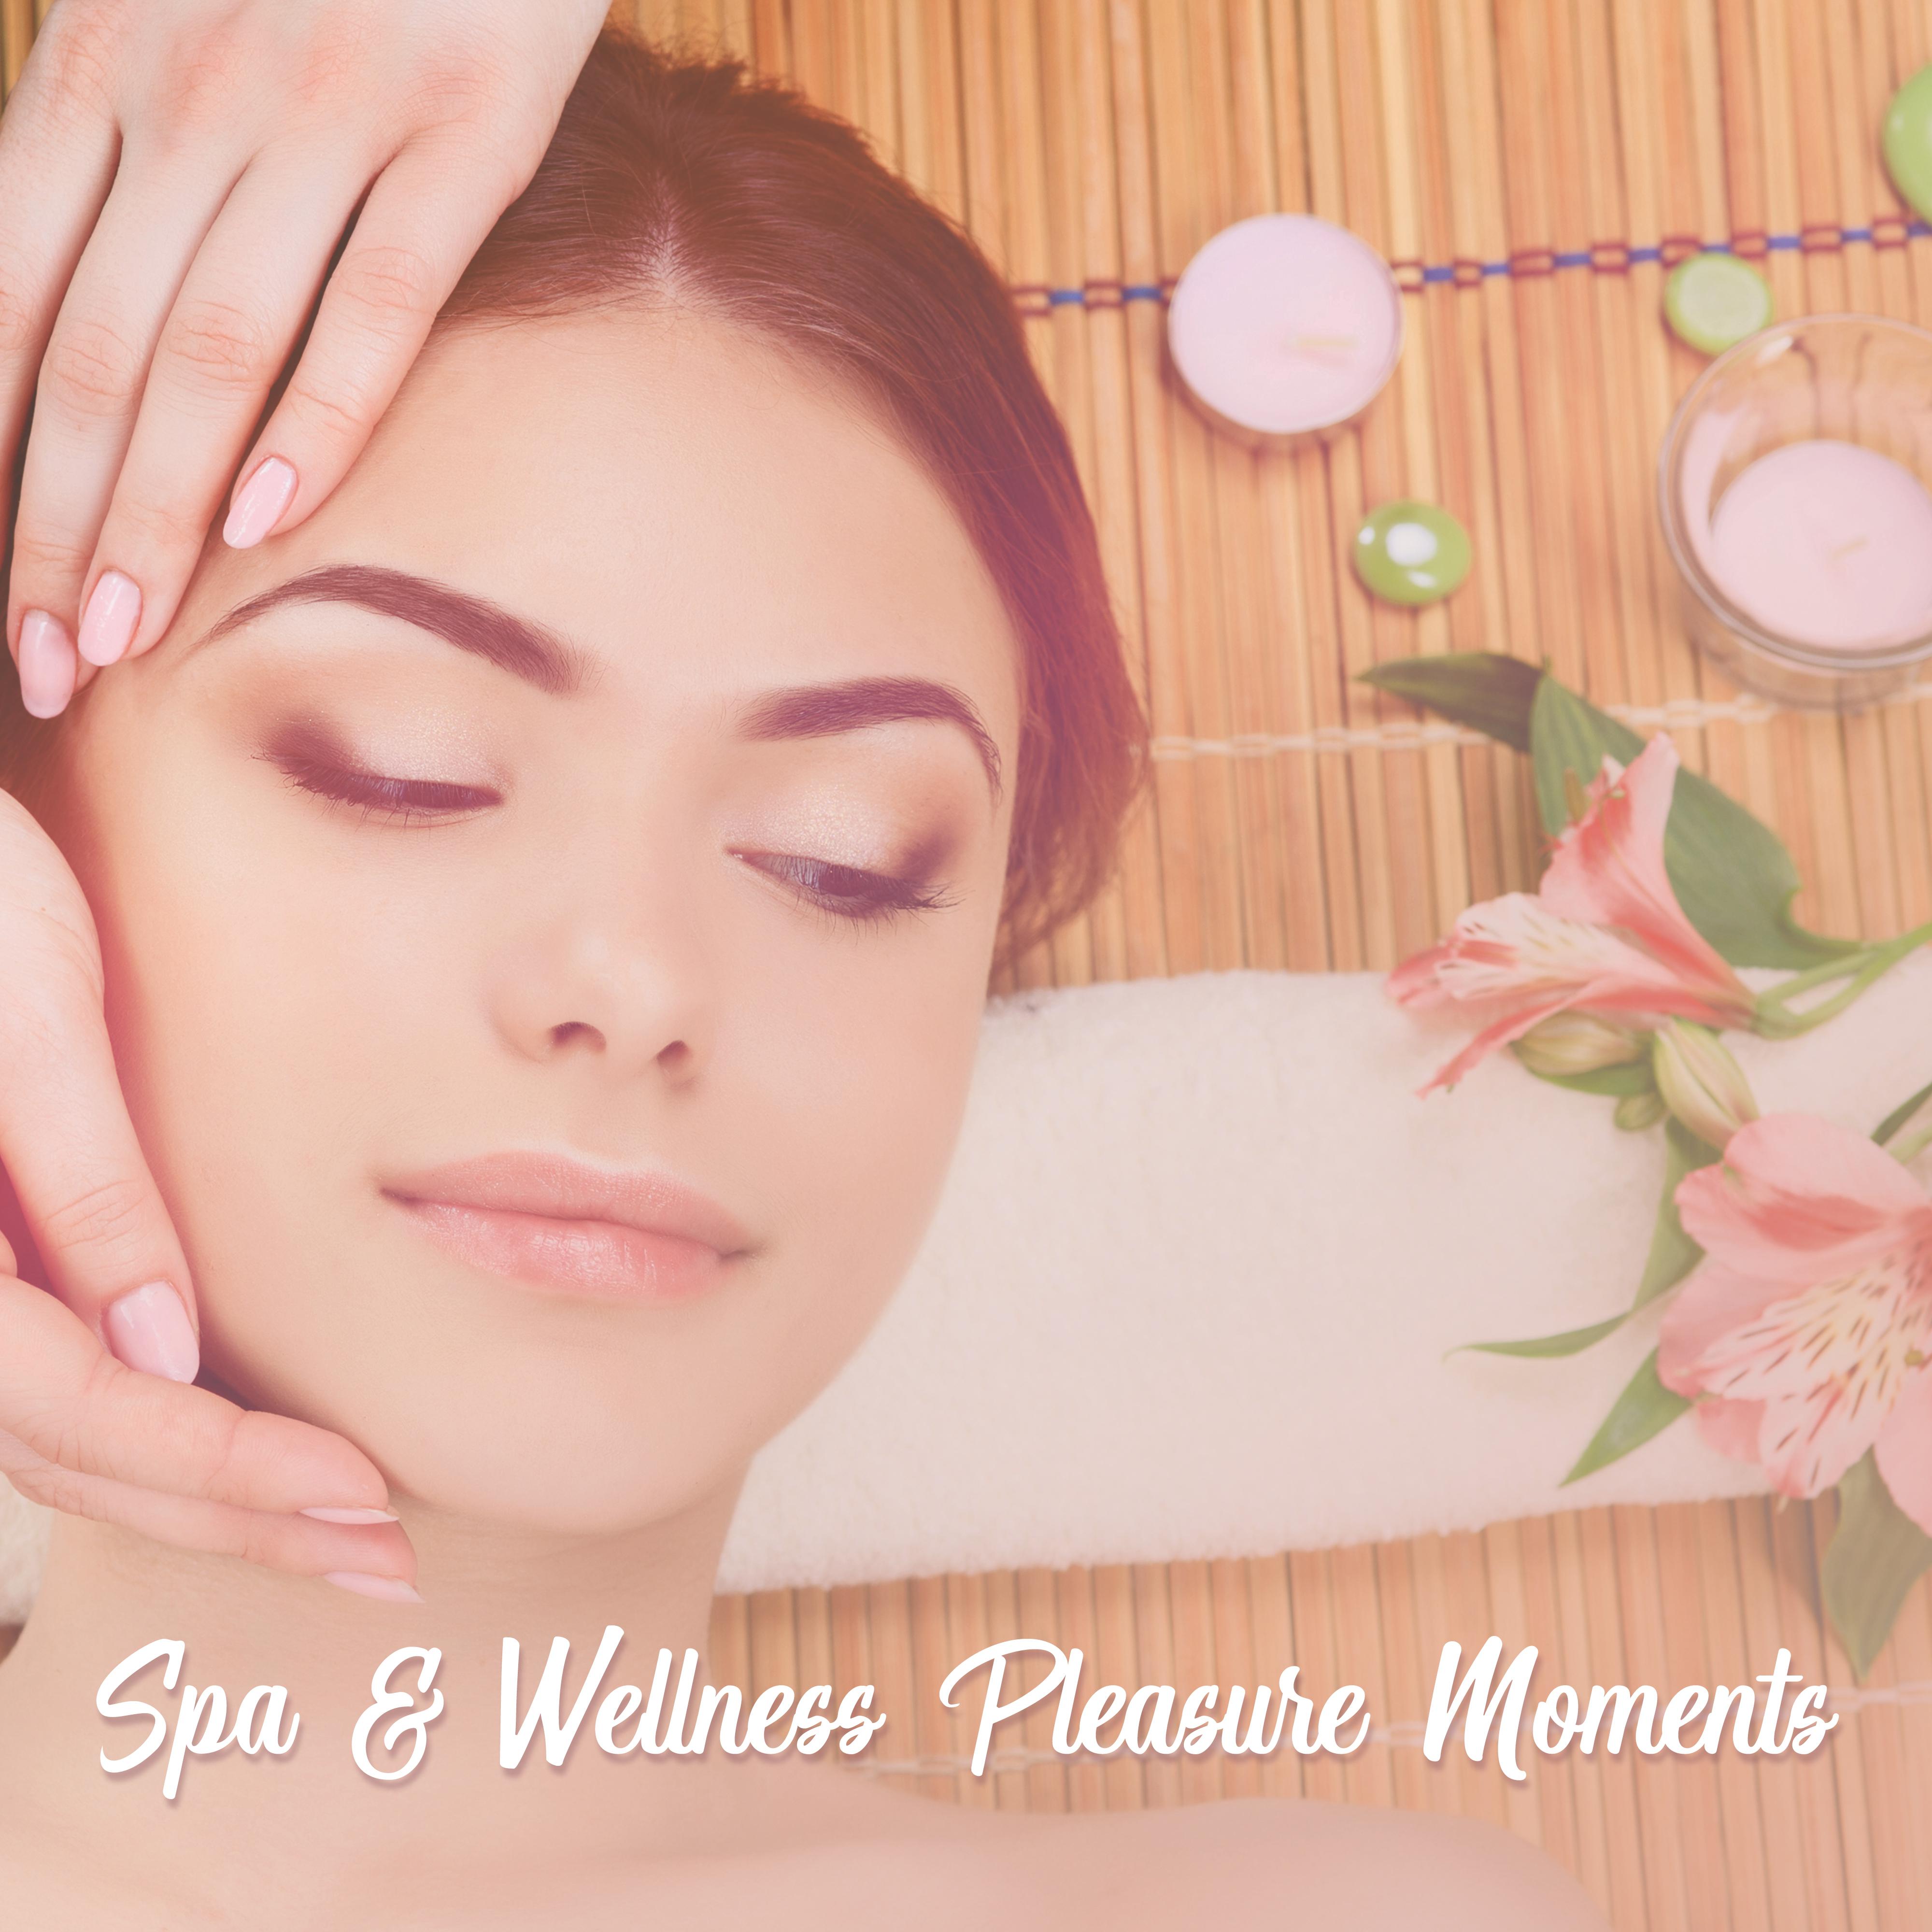 Spa & Wellness Pleasure Moments – Relaxation Massage New Age Music